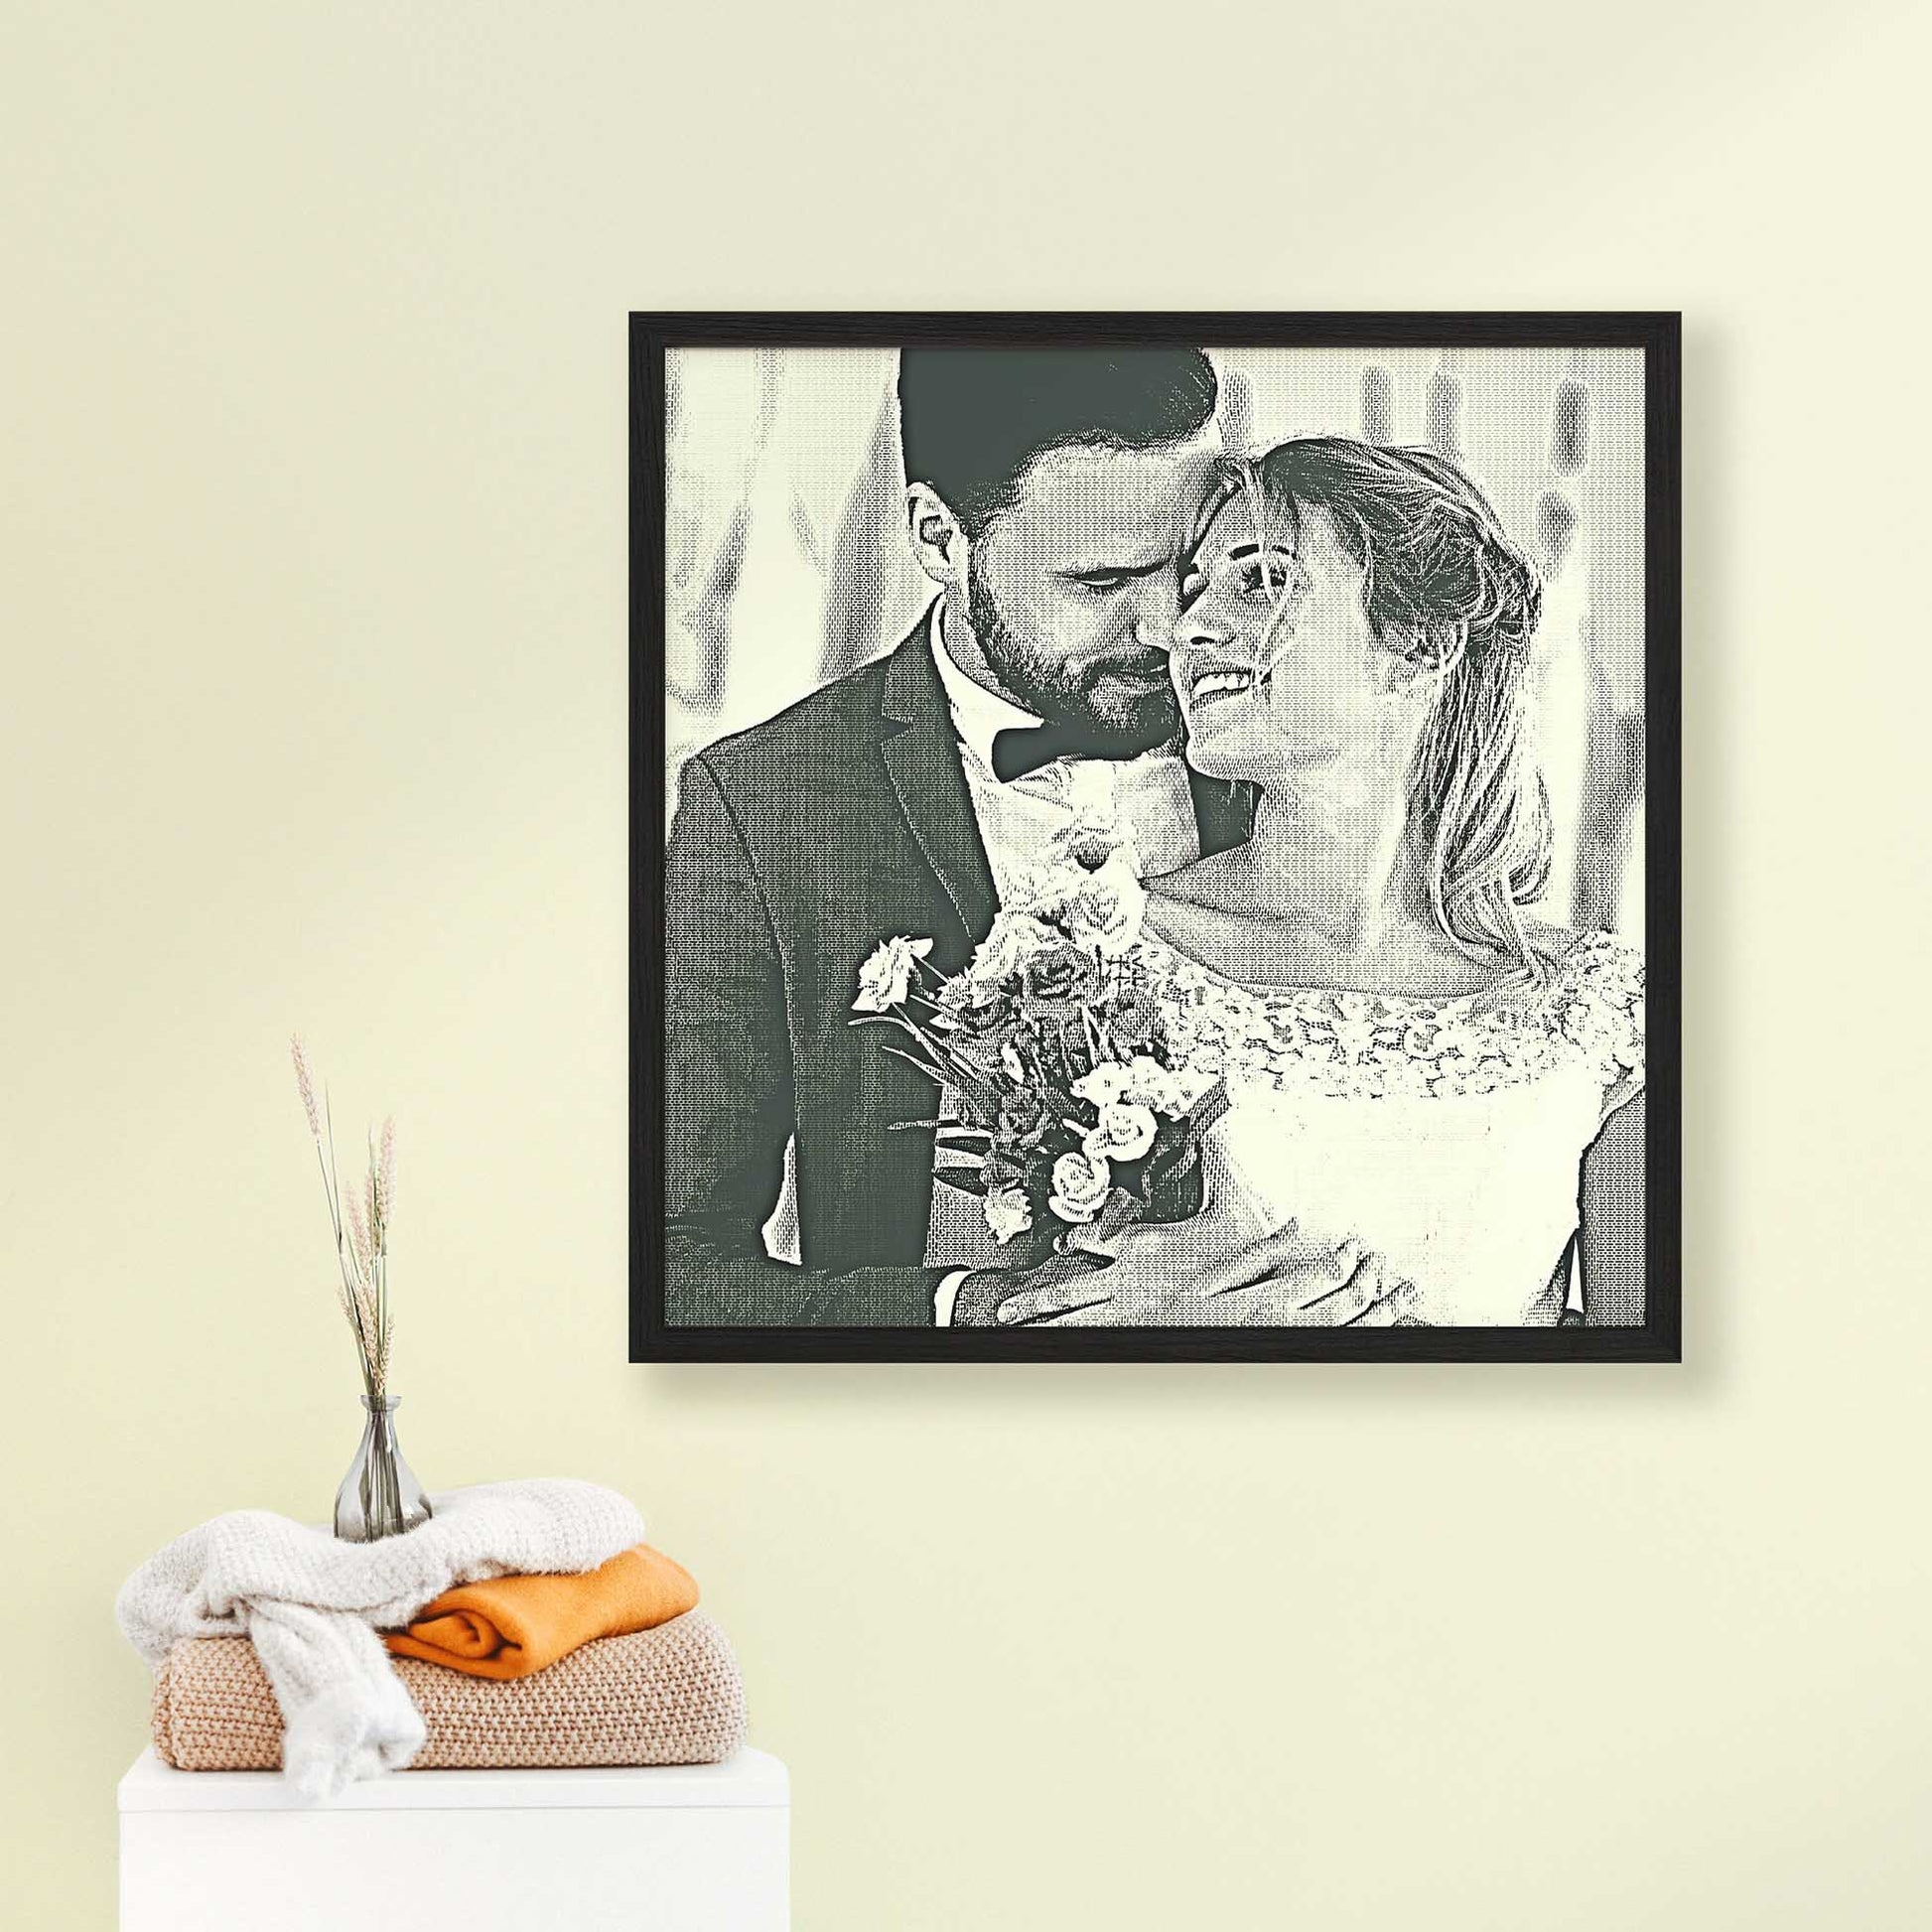 Immerse yourself in the beauty of our Personalised Money Engraved Framed Print. Its chic and modern design, accompanied by fine digital art, brings a touch of luxury to your space. This unique and original artwork, printed from your photo